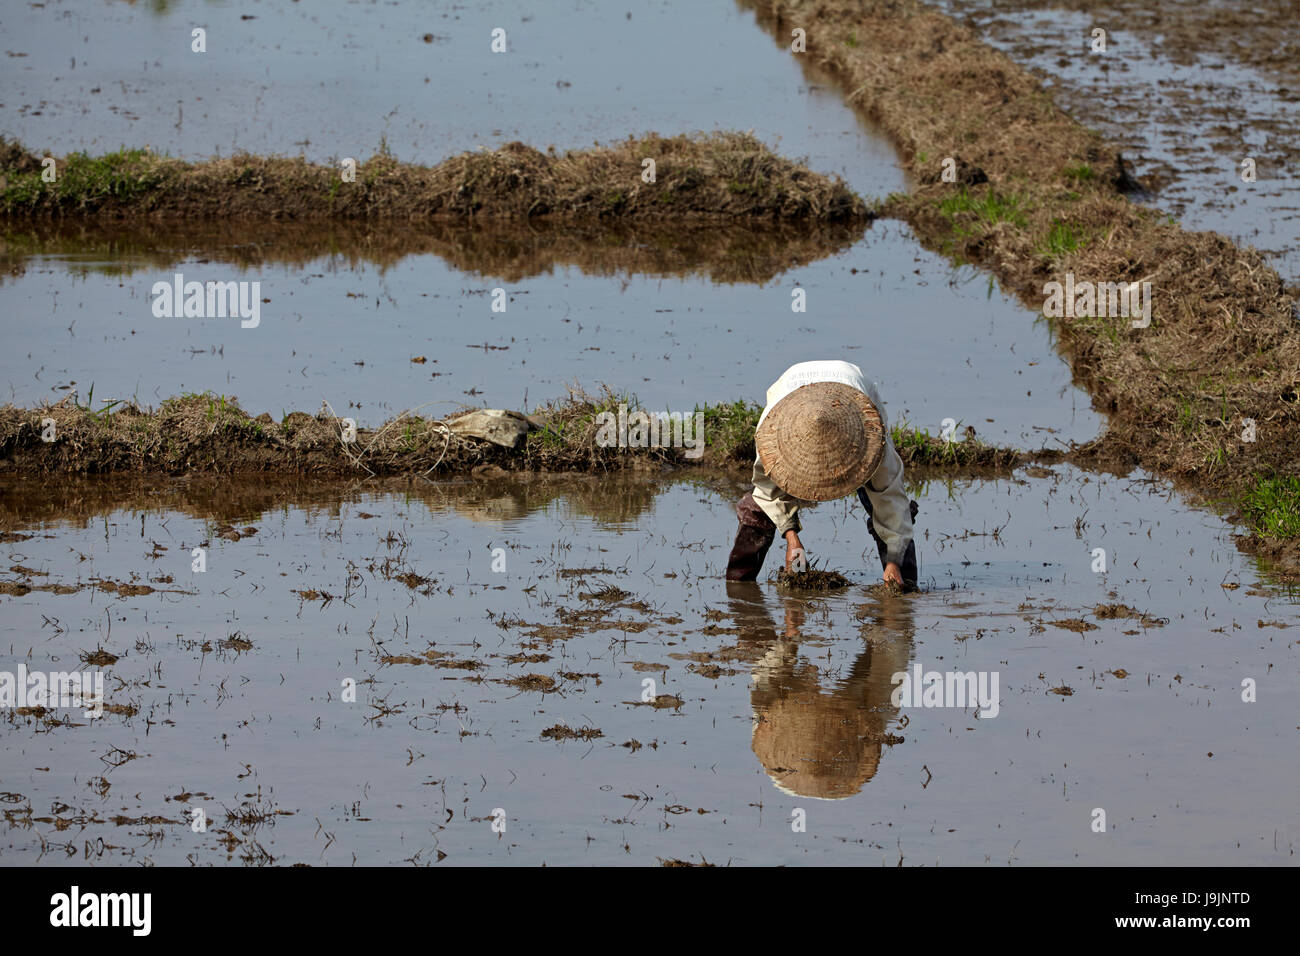 Farmer working in rice paddy near Hue, Thua Thien-Hue Province, North Central Coast, Vietnam Stock Photo